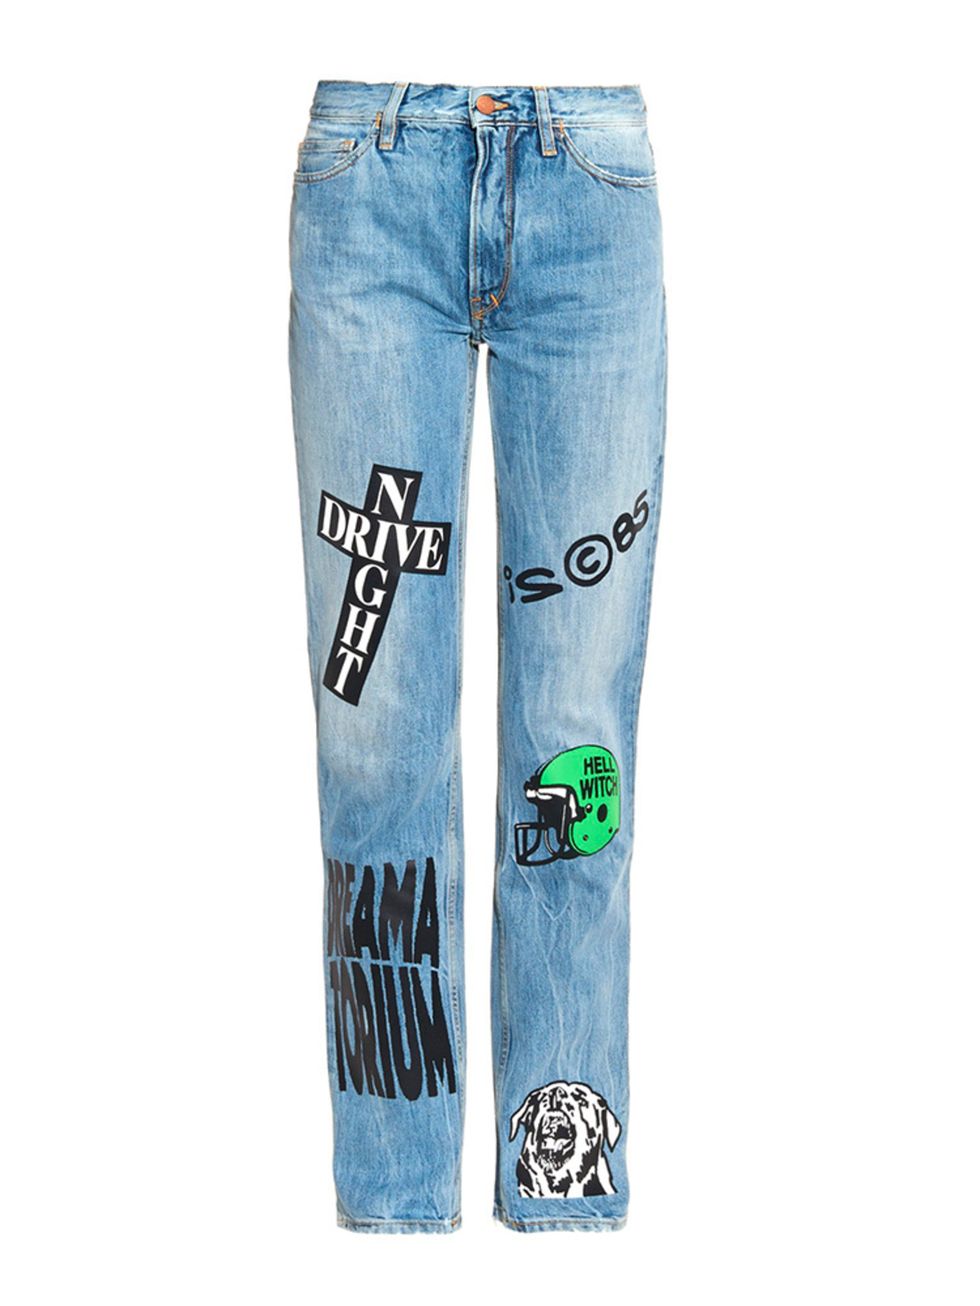 <p><a href="http://www.matchesfashion.com/products/Aries-Norm-straight-leg-vinyl-transfer-jeans-1027274" target="_blank">Aries</a> jeans, £220 </p>